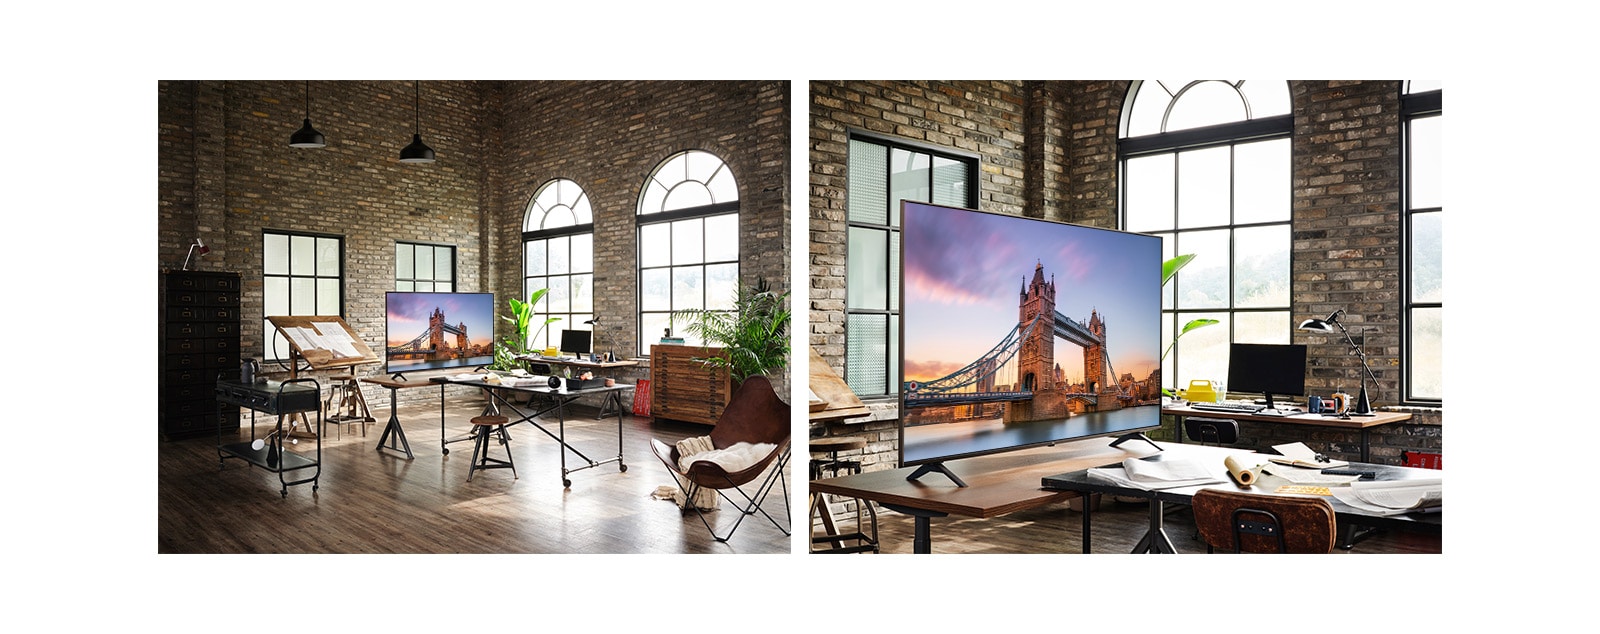 A TV displaying a picture of London Bridge is in an antique workroom<br>A close up of a TV displaying a picture of London Bridge is on a table in an antique workroom.